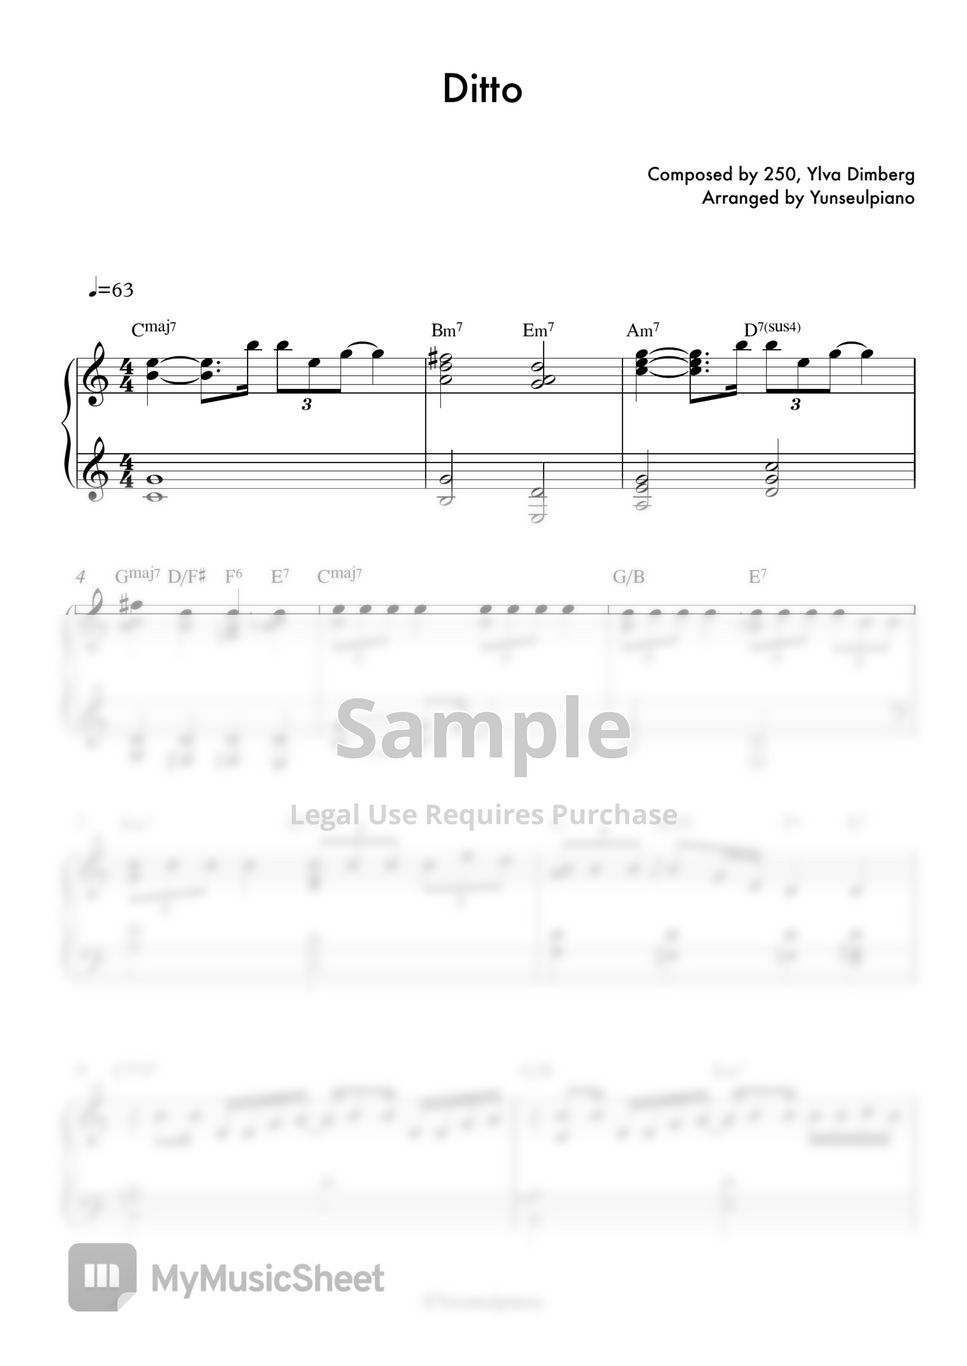 Ditto – NewJeans Sheet music for Piano (Solo)